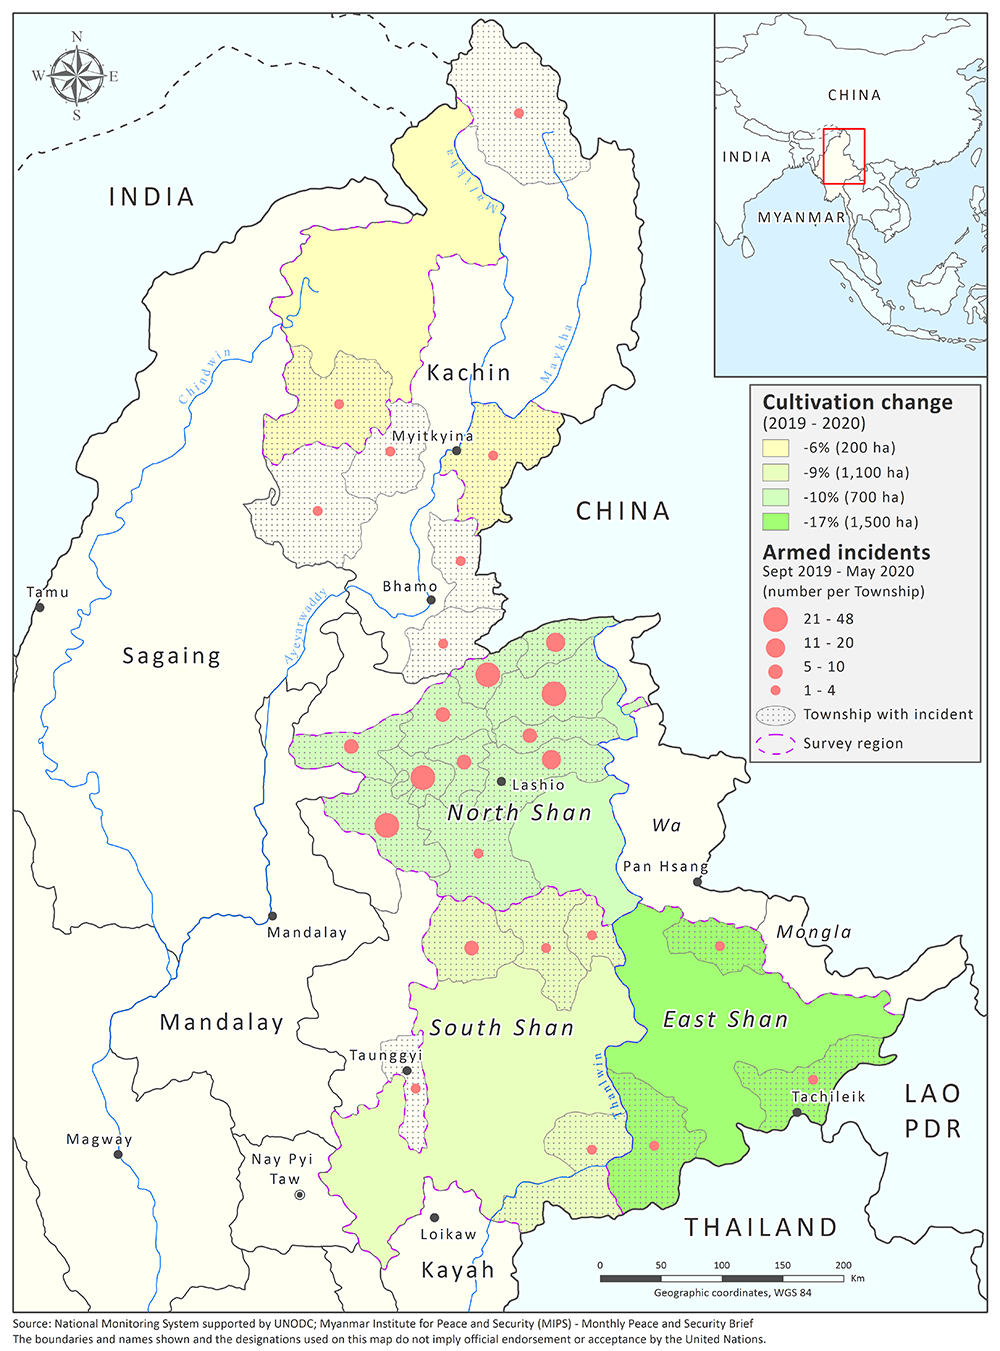 <p>Cultivation change and reported conflict and armed incidents during the 2019-2020 opium poppy growing season</p>